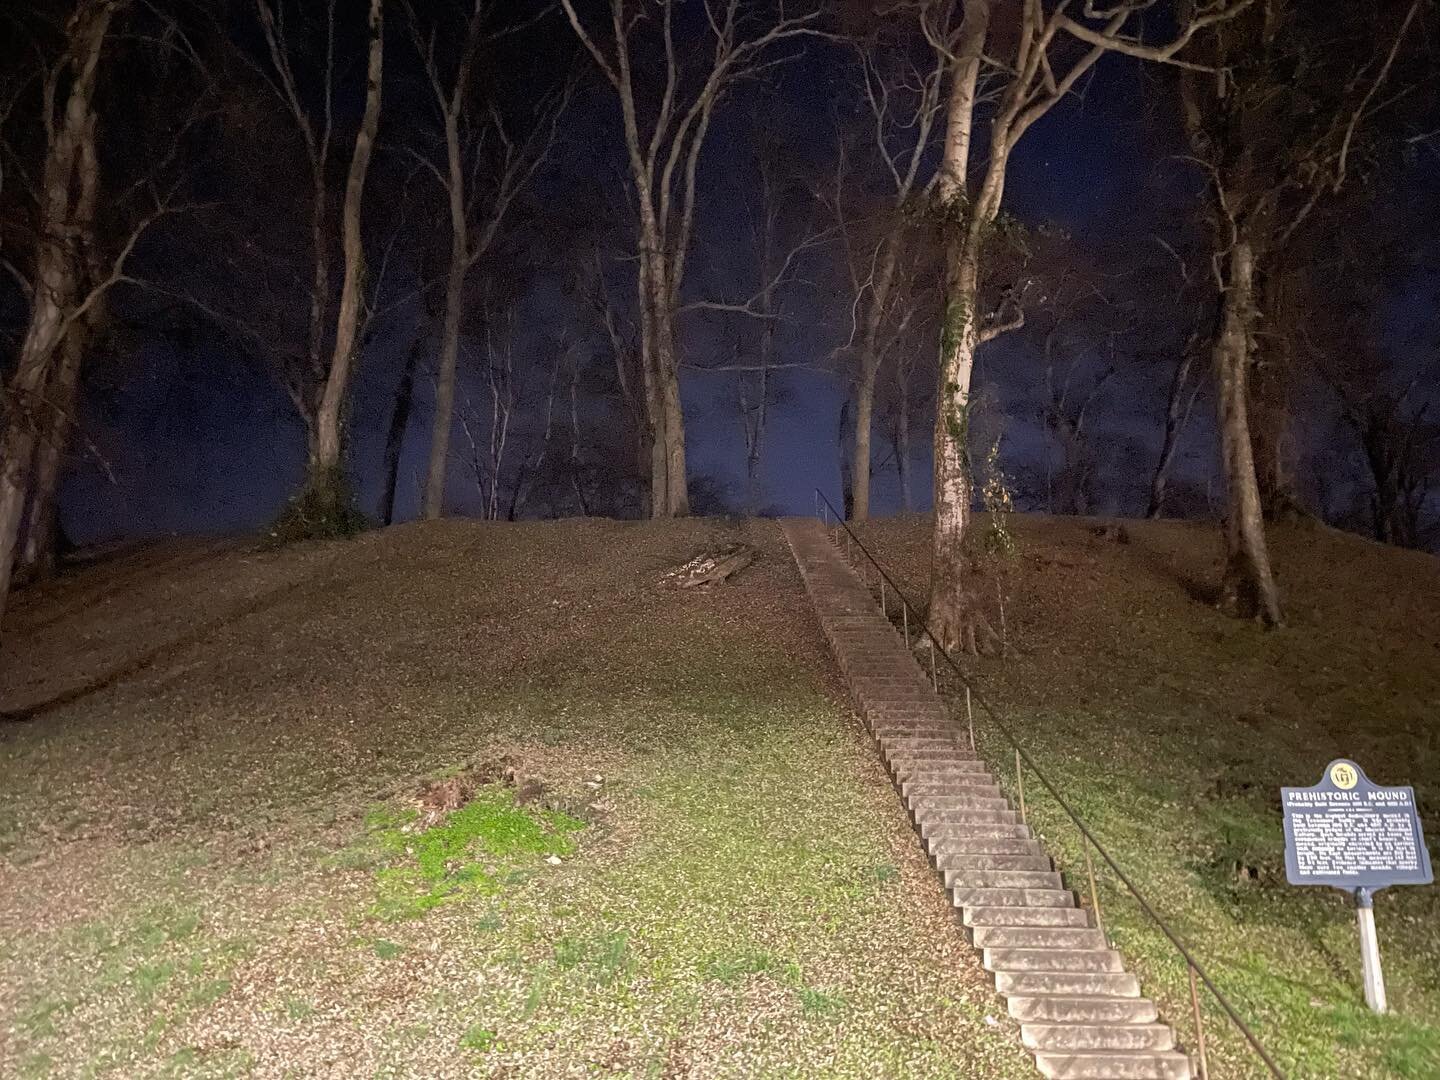 These are images of the Florence Mound at night, taken in February, 2023.